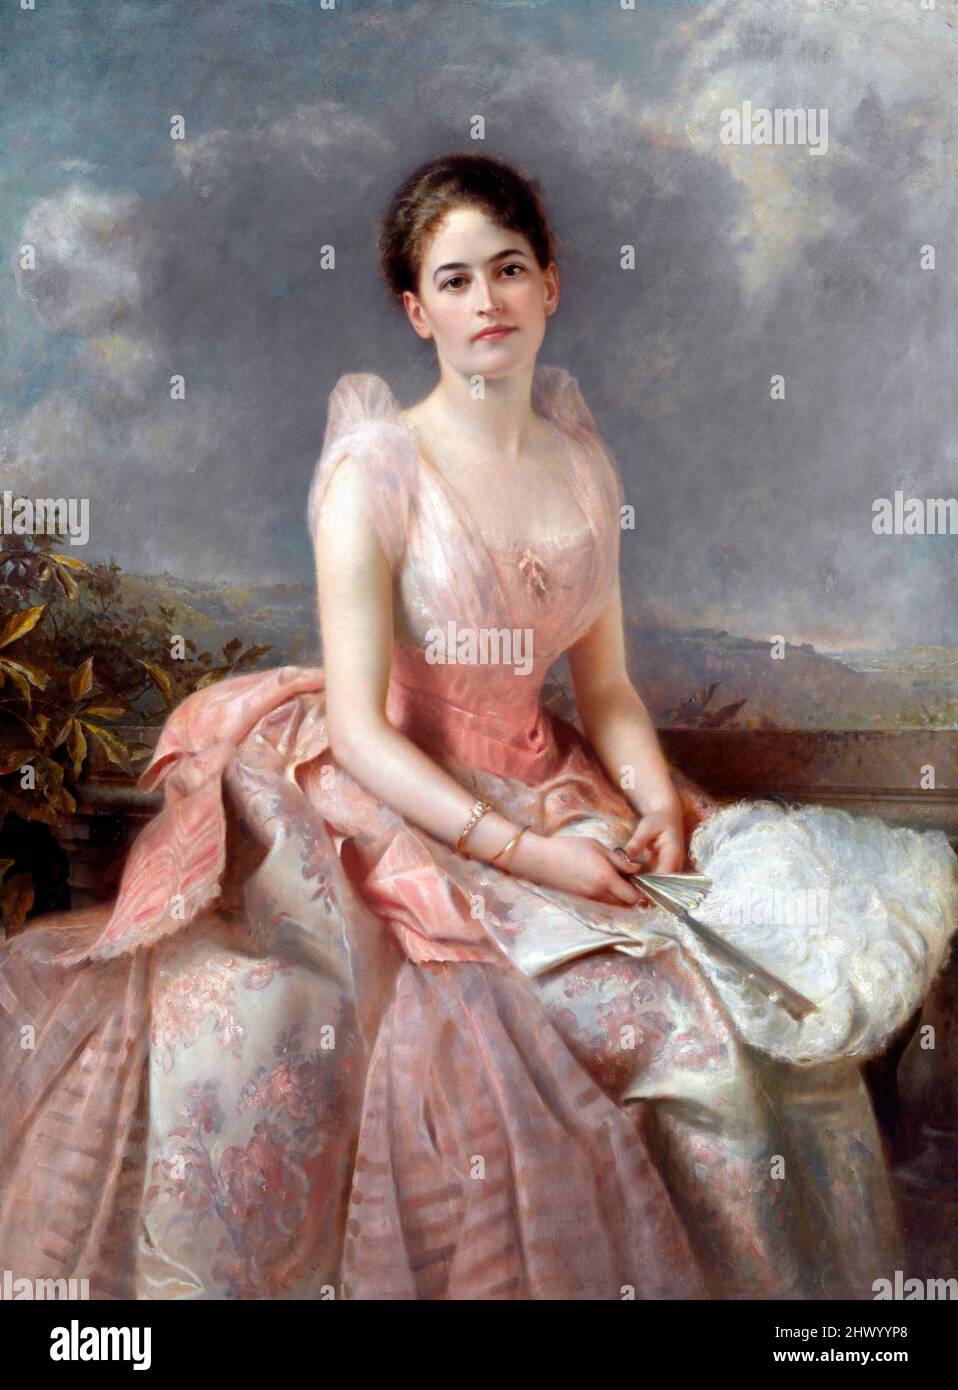 Portrait of the founder of the Girl Scouts of the USA, Juliette Gordon Low (1860-1927) by Edward Hughes, oil on canvas, 1887 Stock Photo